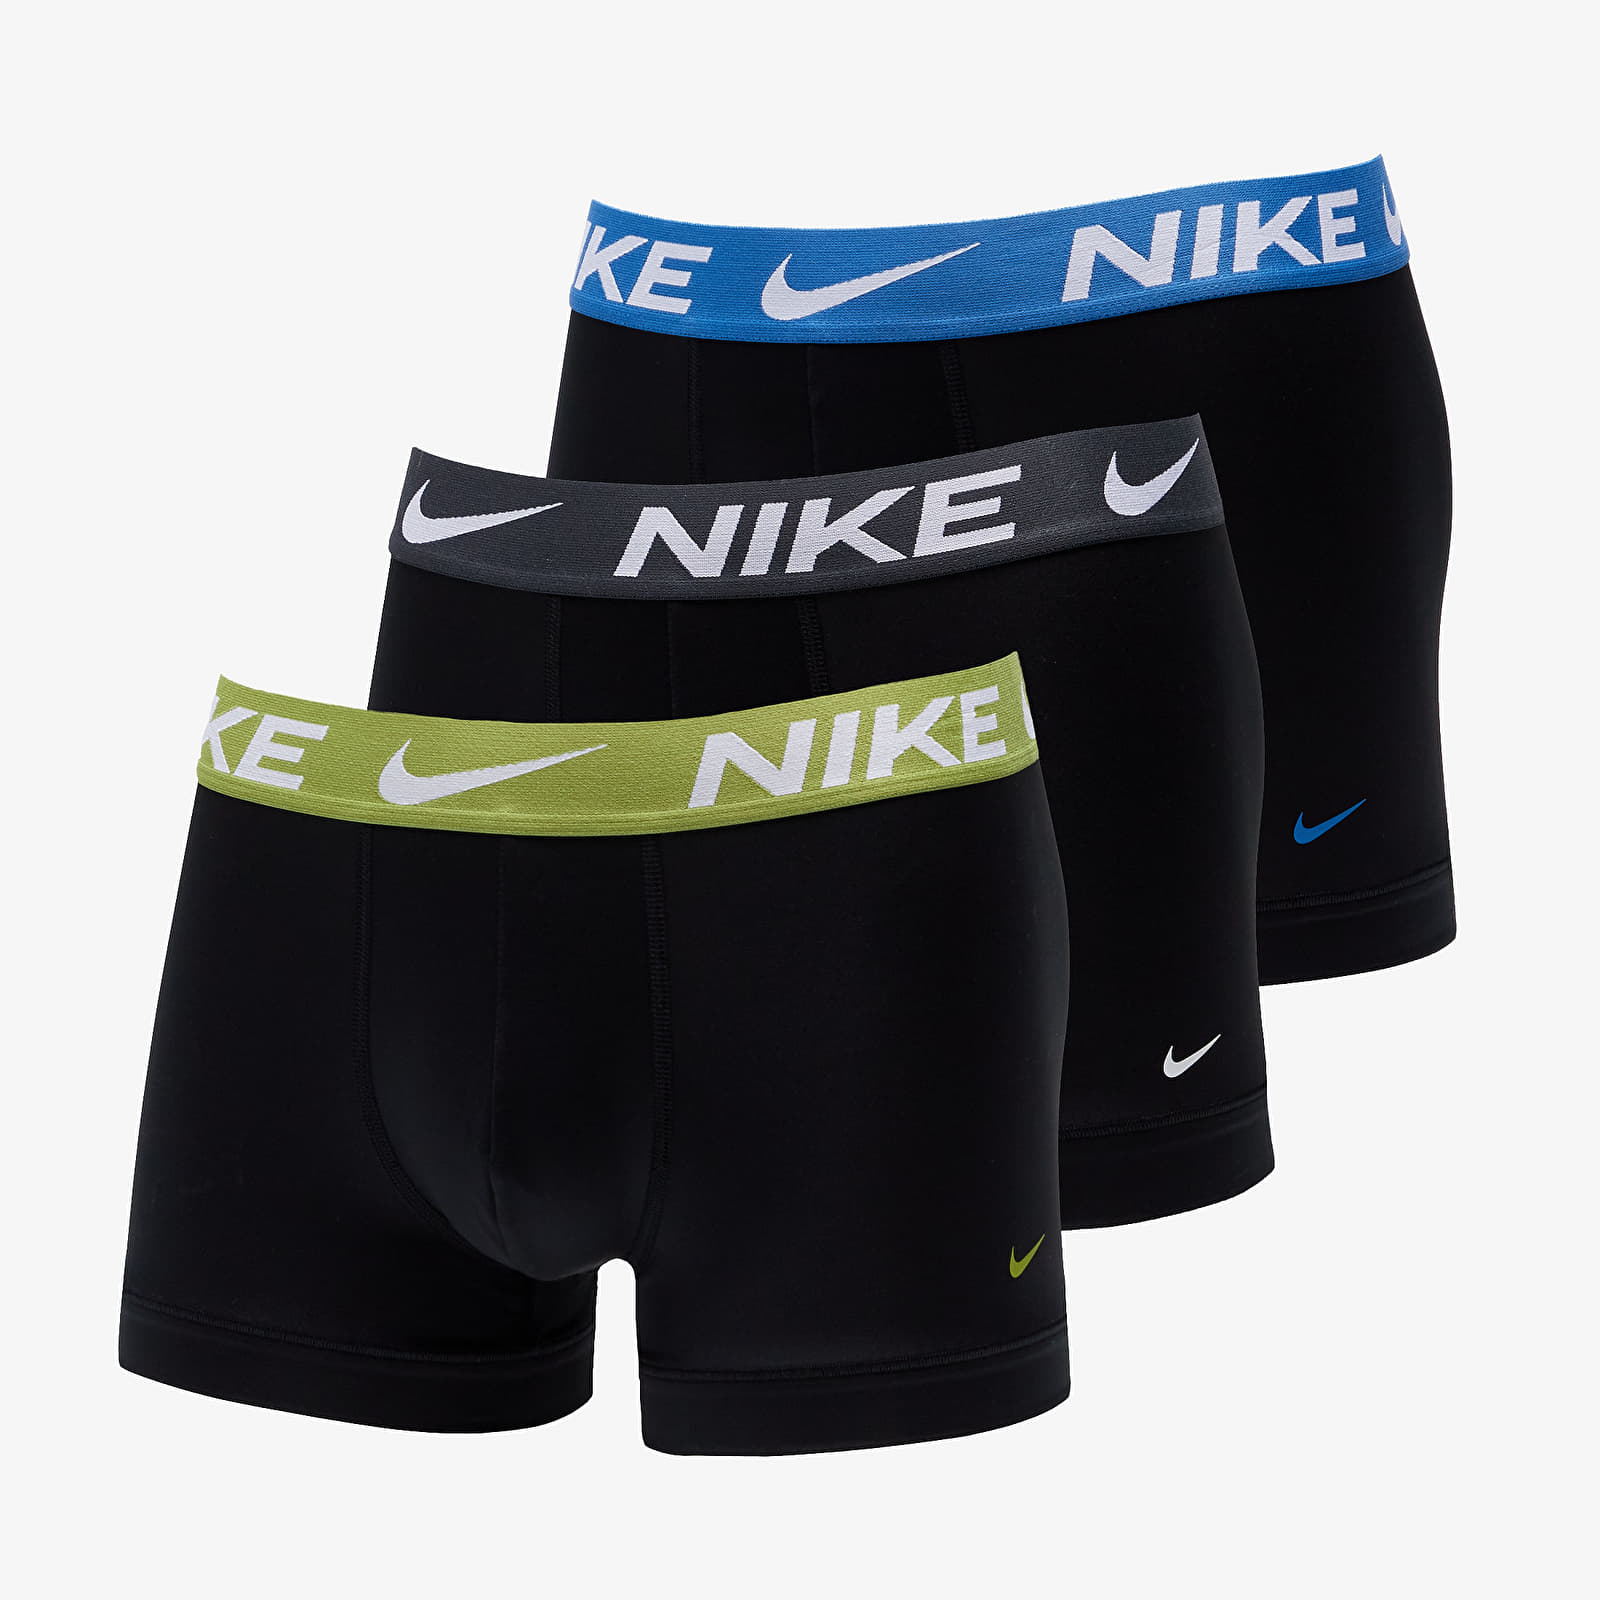 Boxer shorts Nike Trunk 3-Pack Multicolor